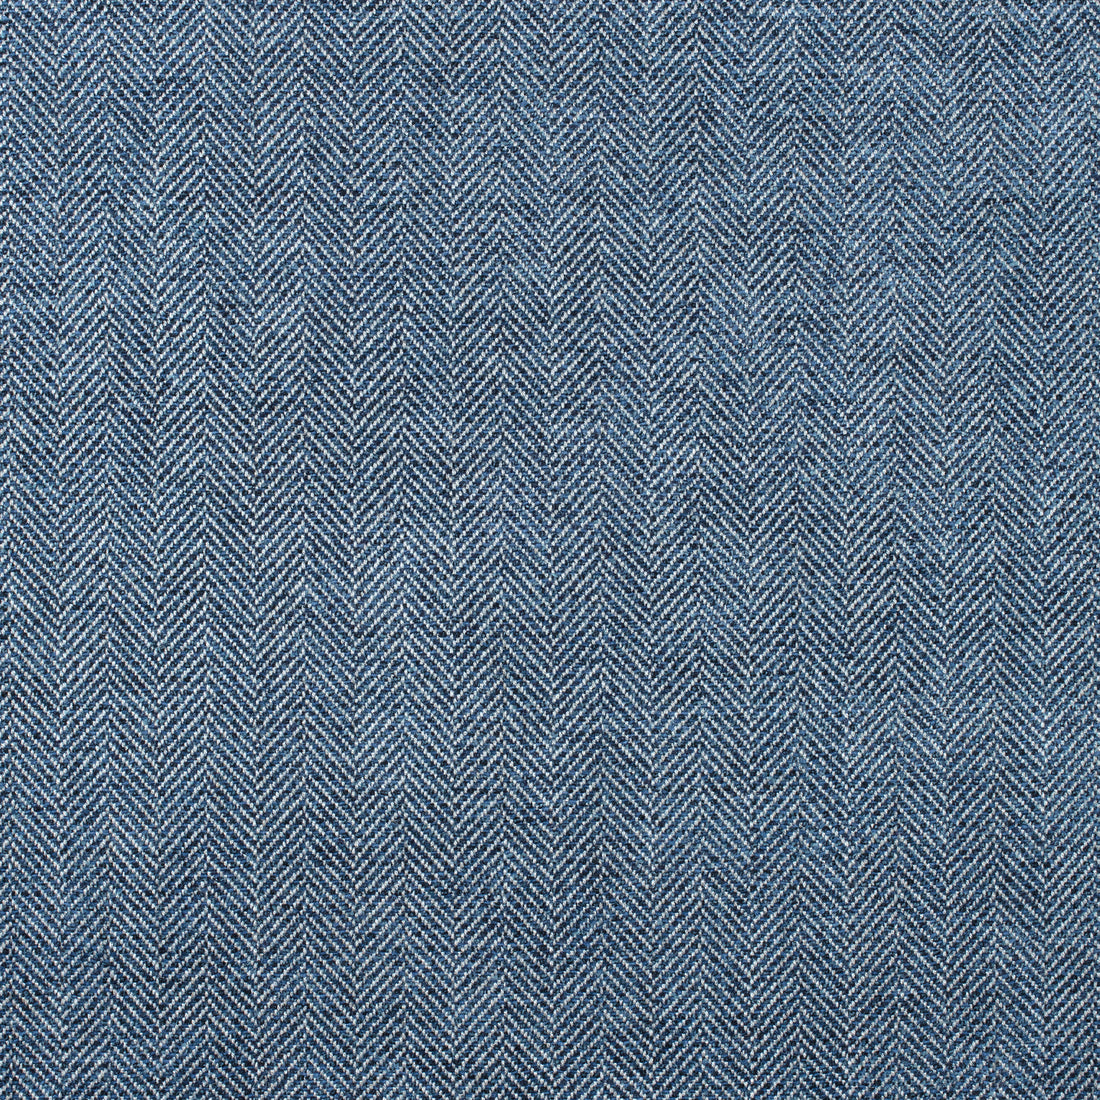 Hadrian Herringbone fabric in navy color - pattern number W80712 - by Thibaut in the Woven Resource 11: Rialto collection